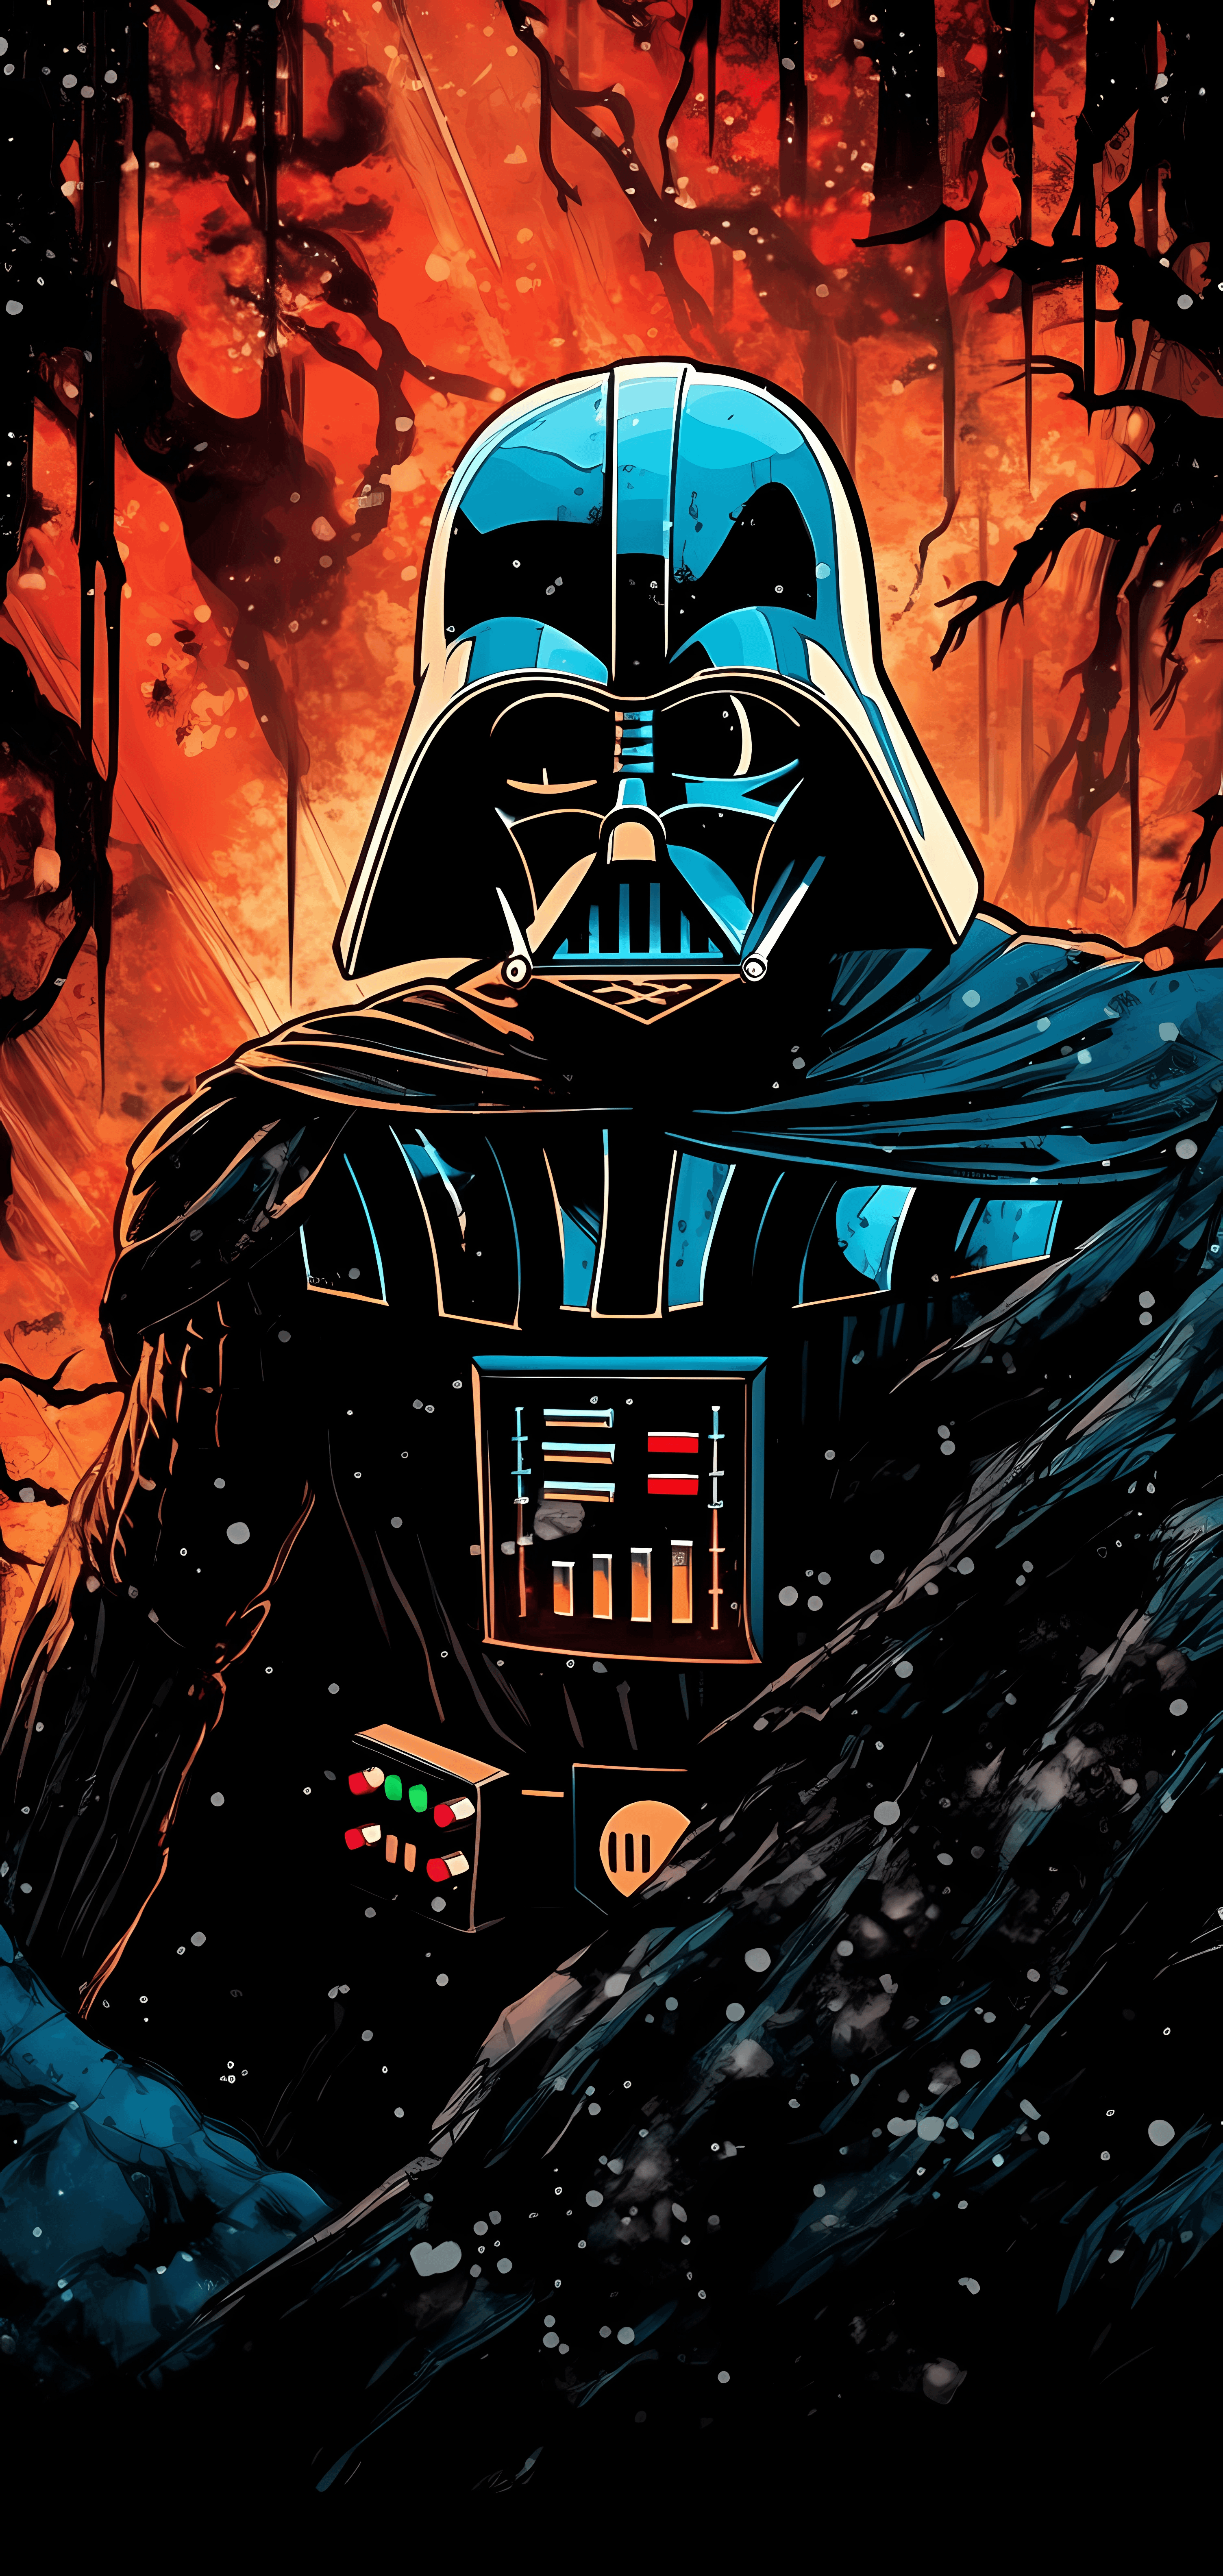 Darth Vader Star Wars iPhone Wallpaper with high-resolution 1080x1920 pixel. You can use this wallpaper for your iPhone 5, 6, 7, 8, X, XS, XR backgrounds, Mobile Screensaver, or iPad Lock Screen - Darth Vader